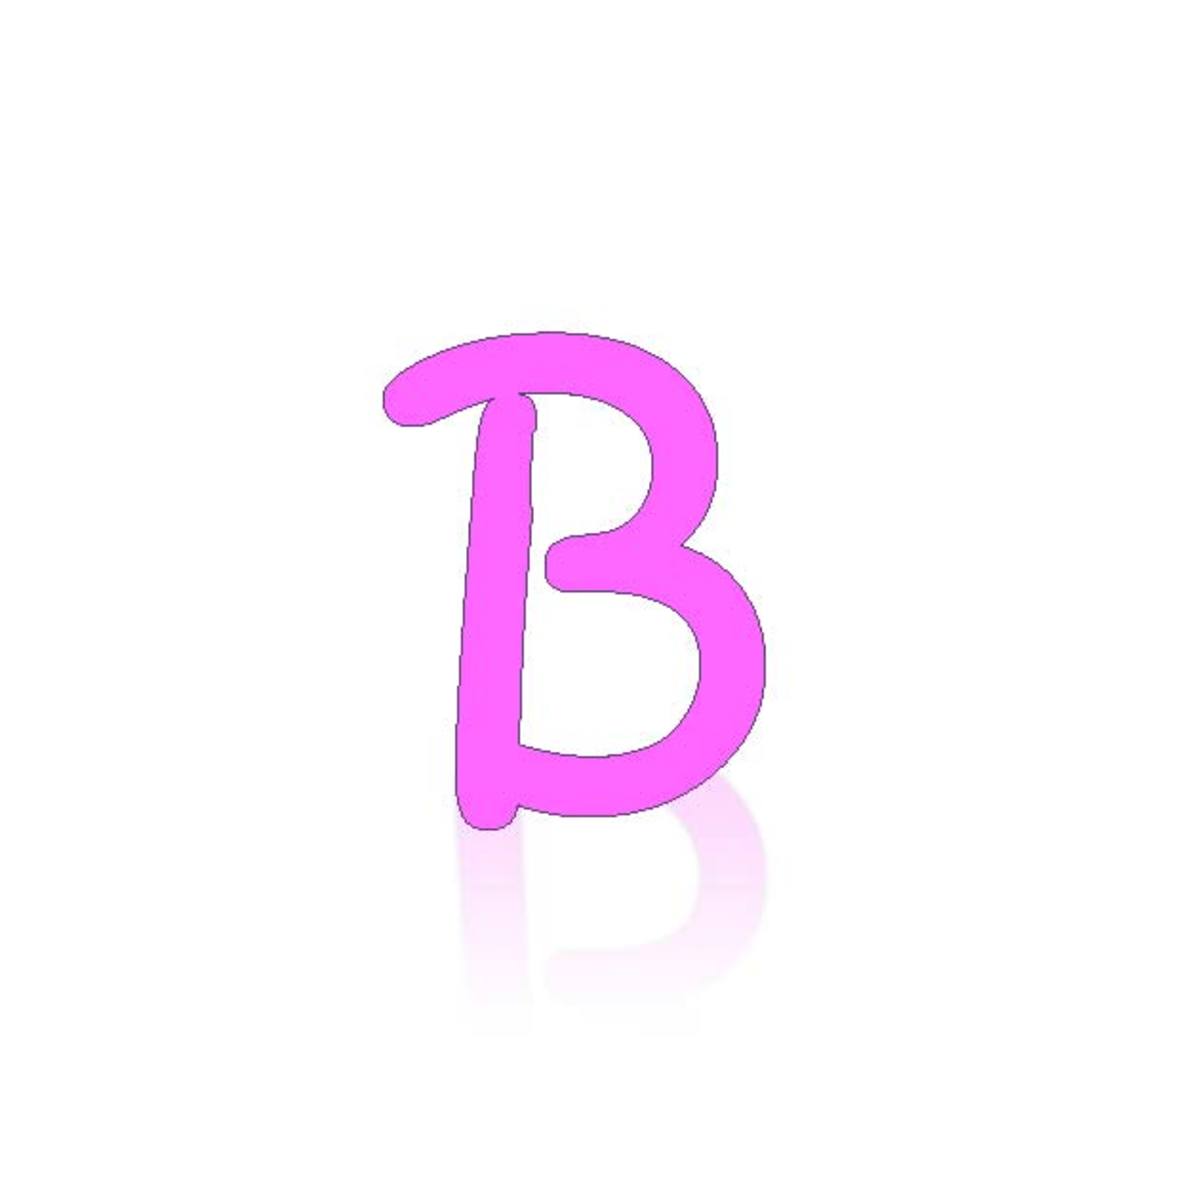 Acrostic Name Poems For Girls Names Starting With B Hubpages